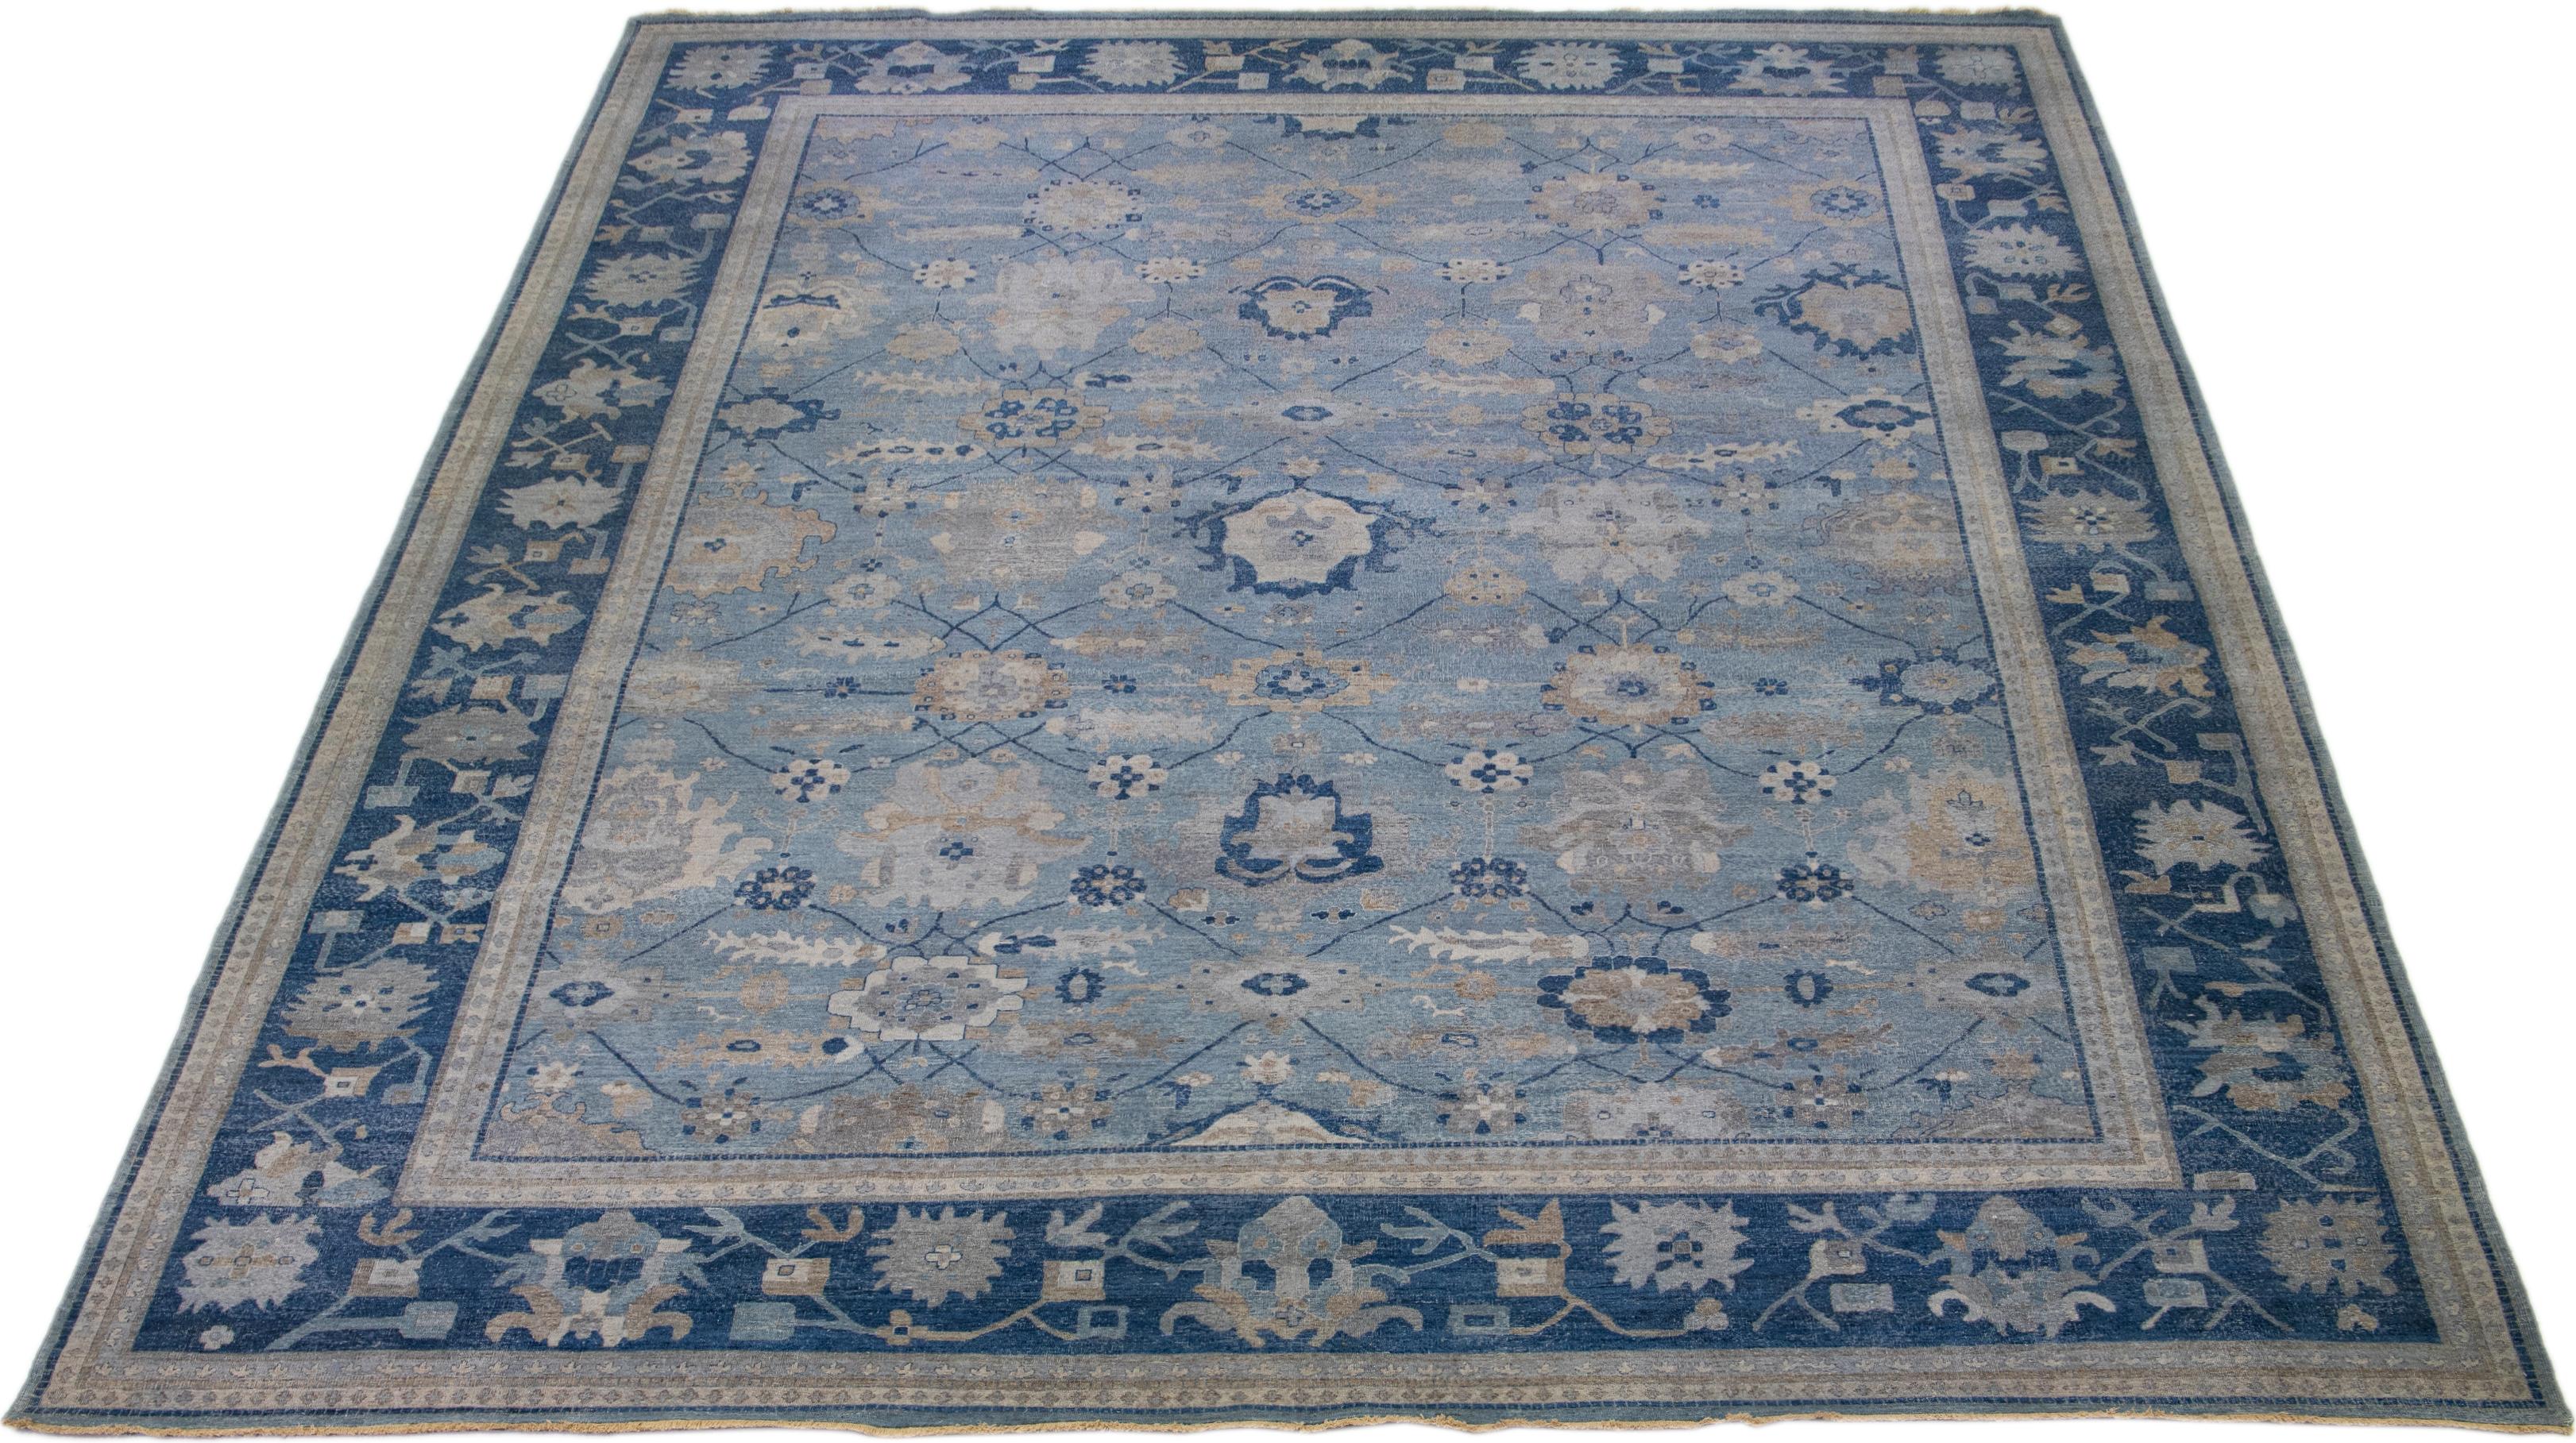 The Artisan line from Apadana brings an exquisite antique style to any space. This hand-knotted rug showcases a beautiful all-over floral pattern with a Blue color scheme and multi-colored accents. It measures 14' 10